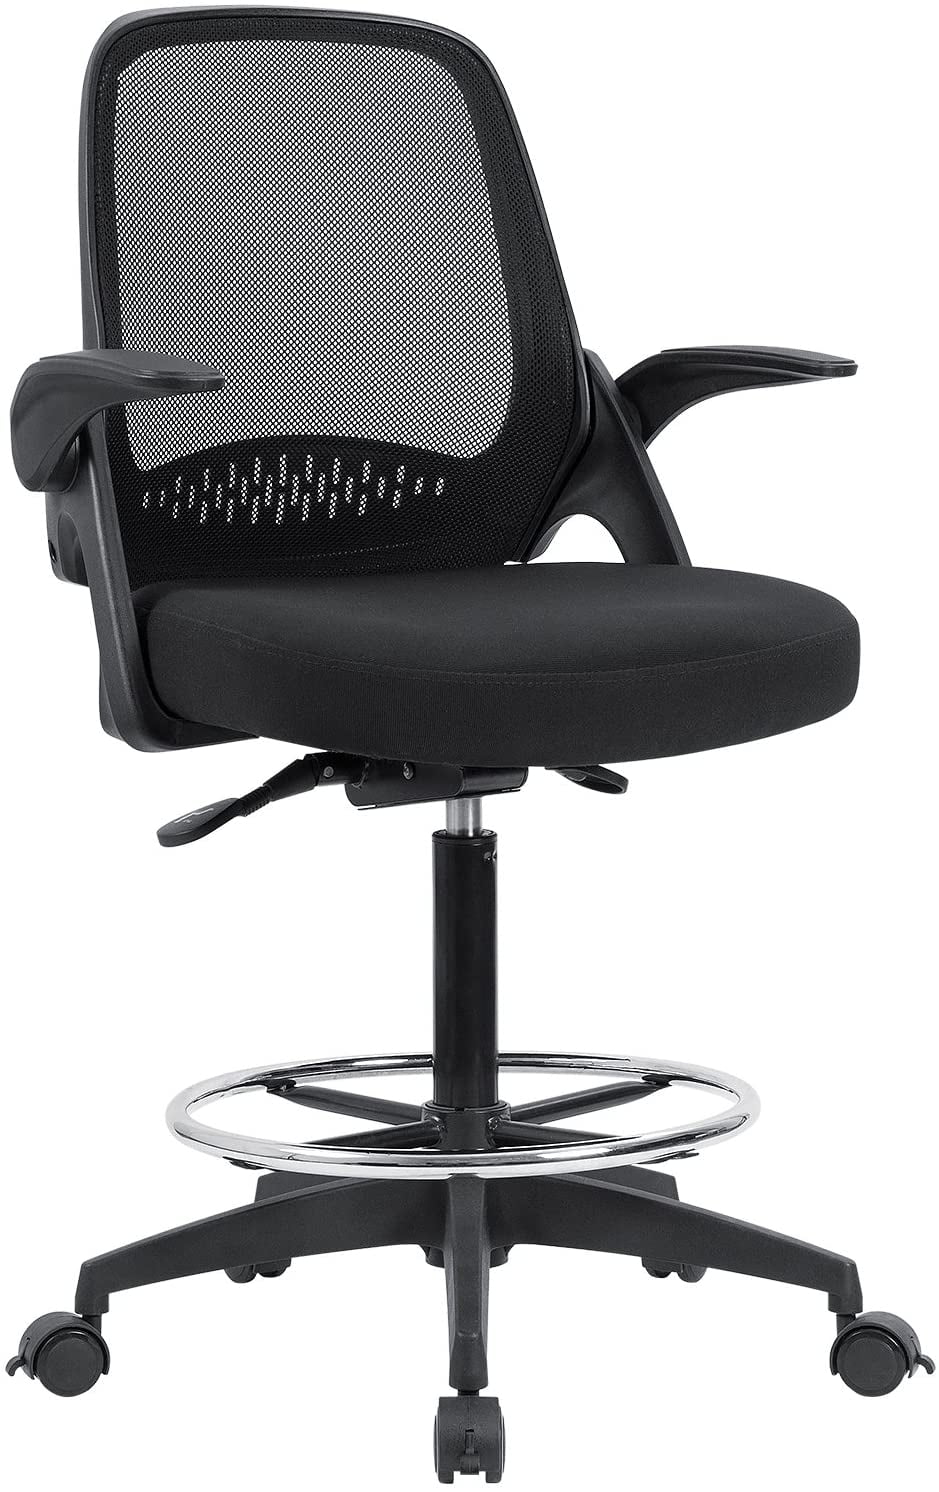 Black Mesh Drafting Chair Tall Office Chair Mid-Back Office Chair with Flip-up Armrests Adjustable Height Ergonomic PC Chair with Lumbar Support and Foot Ring Swivel Computer Stool for Standing Desk 